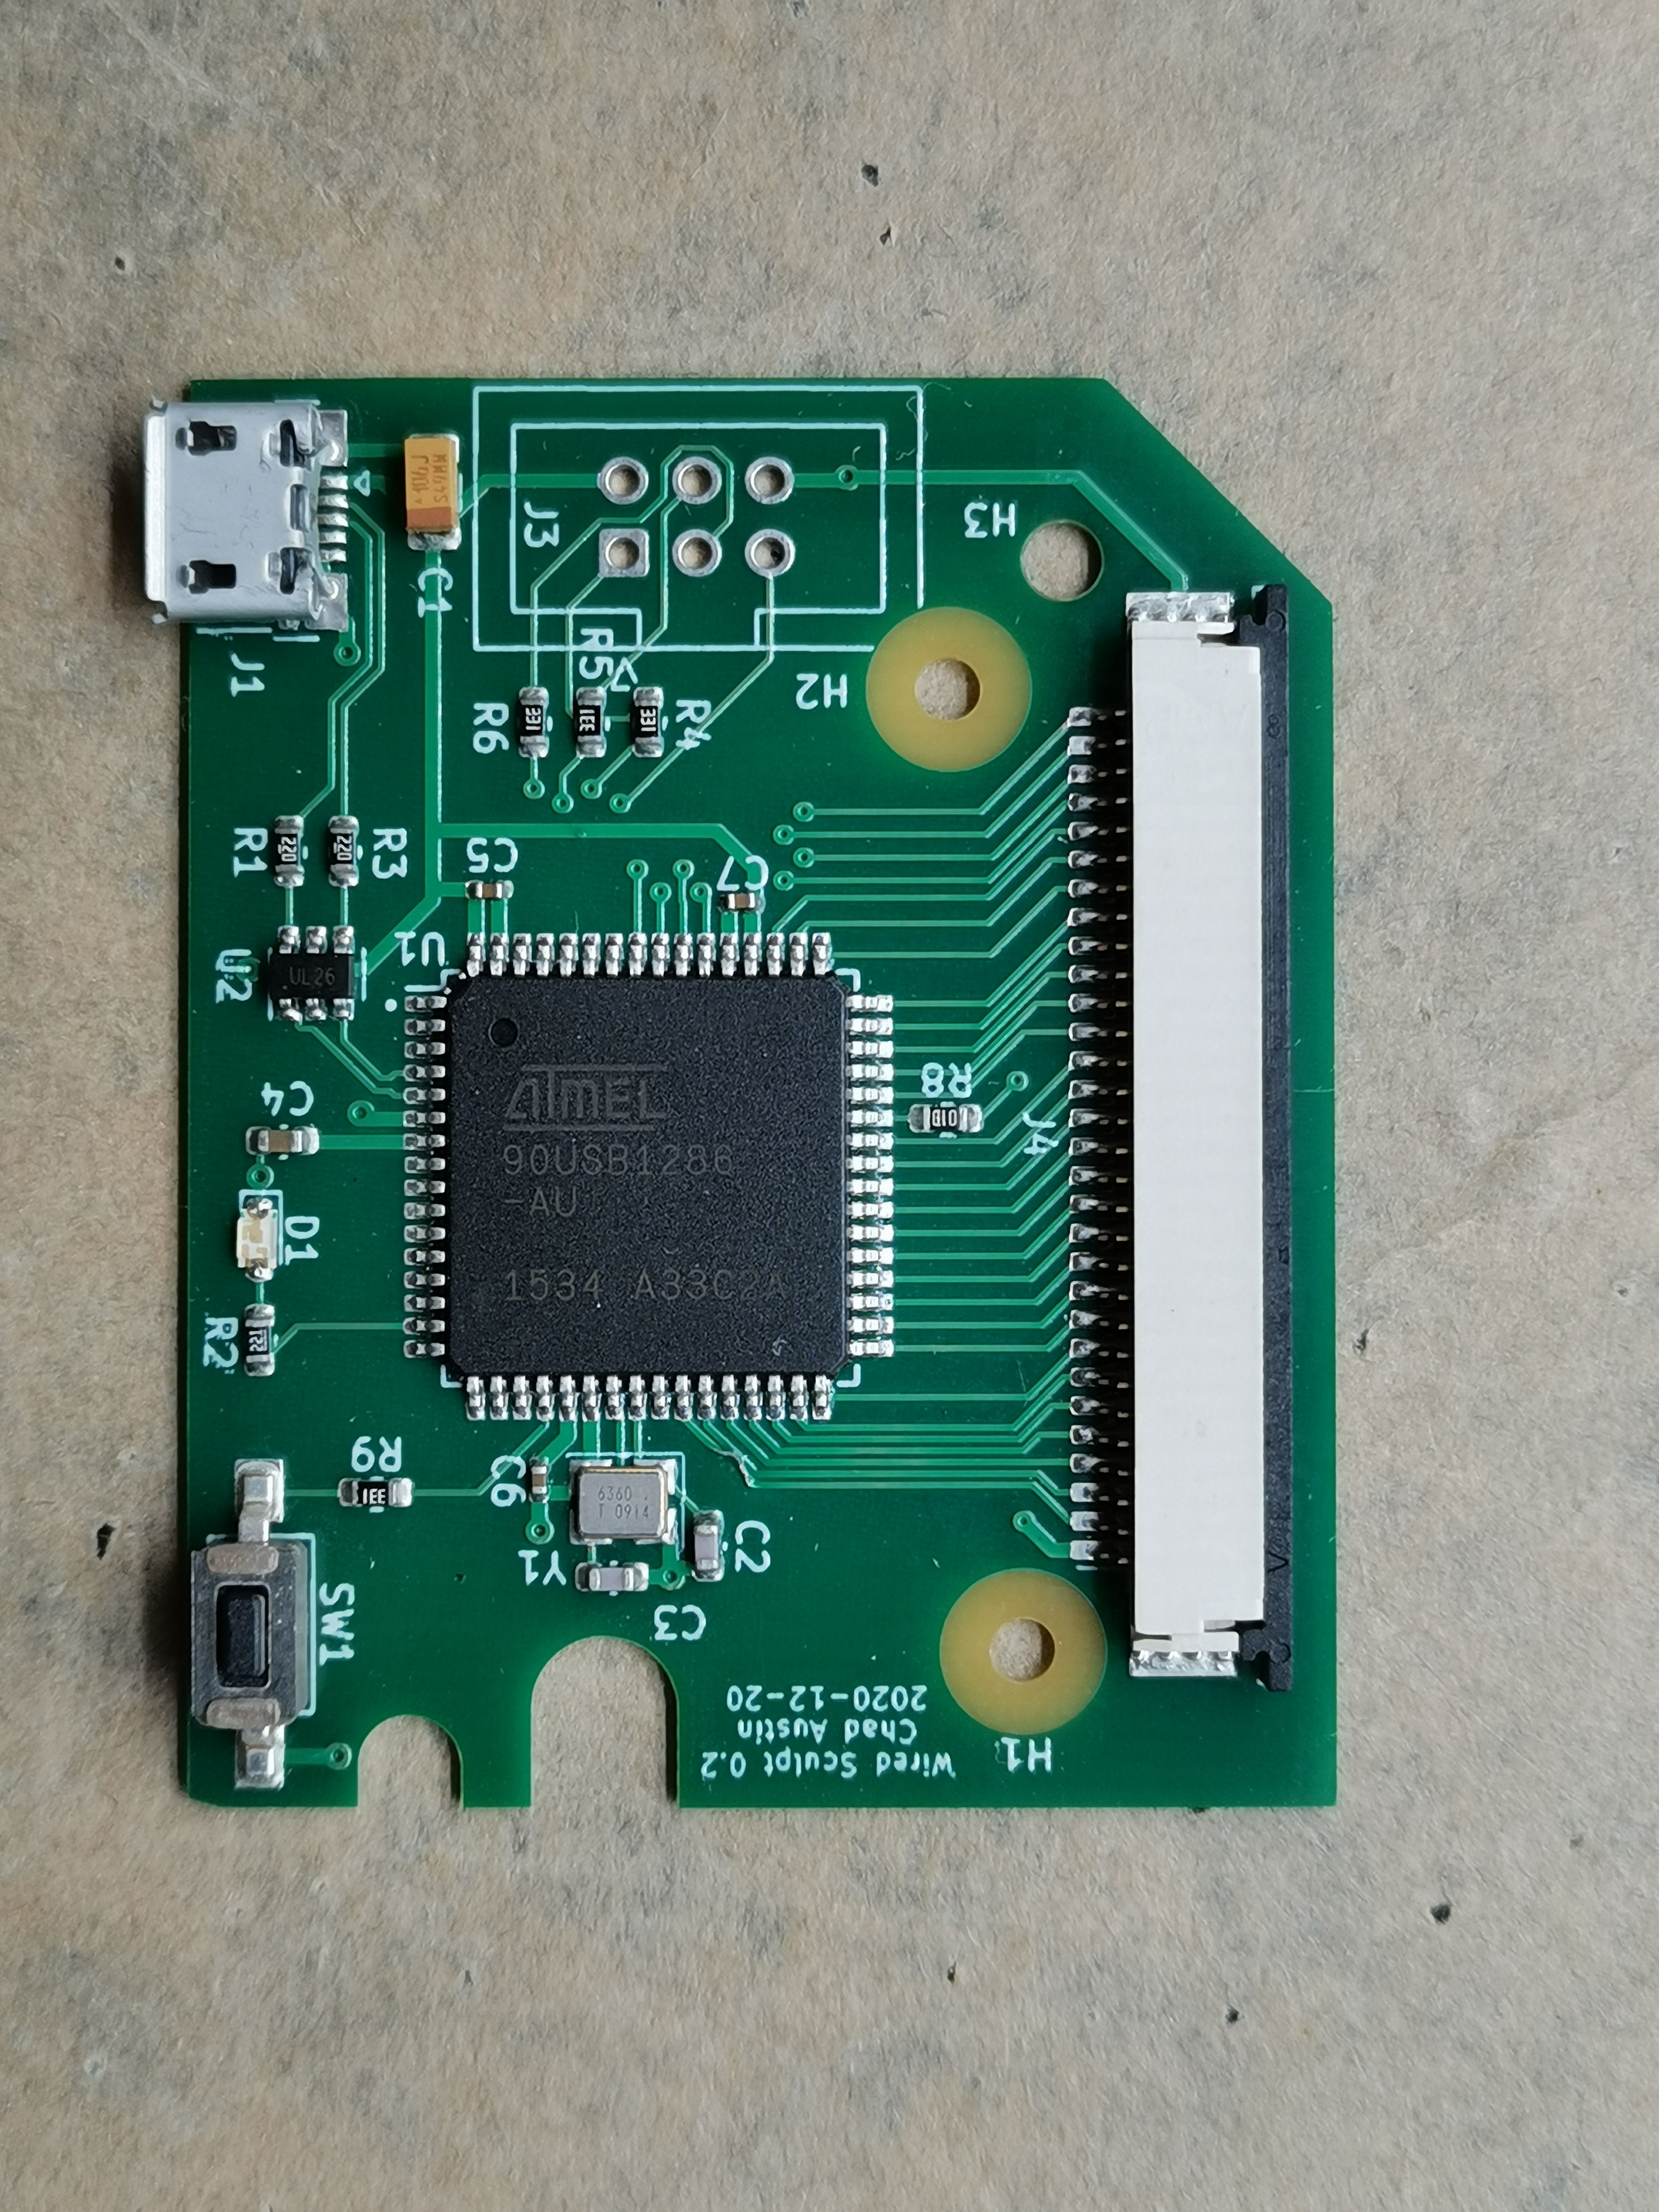 Top of assembled board